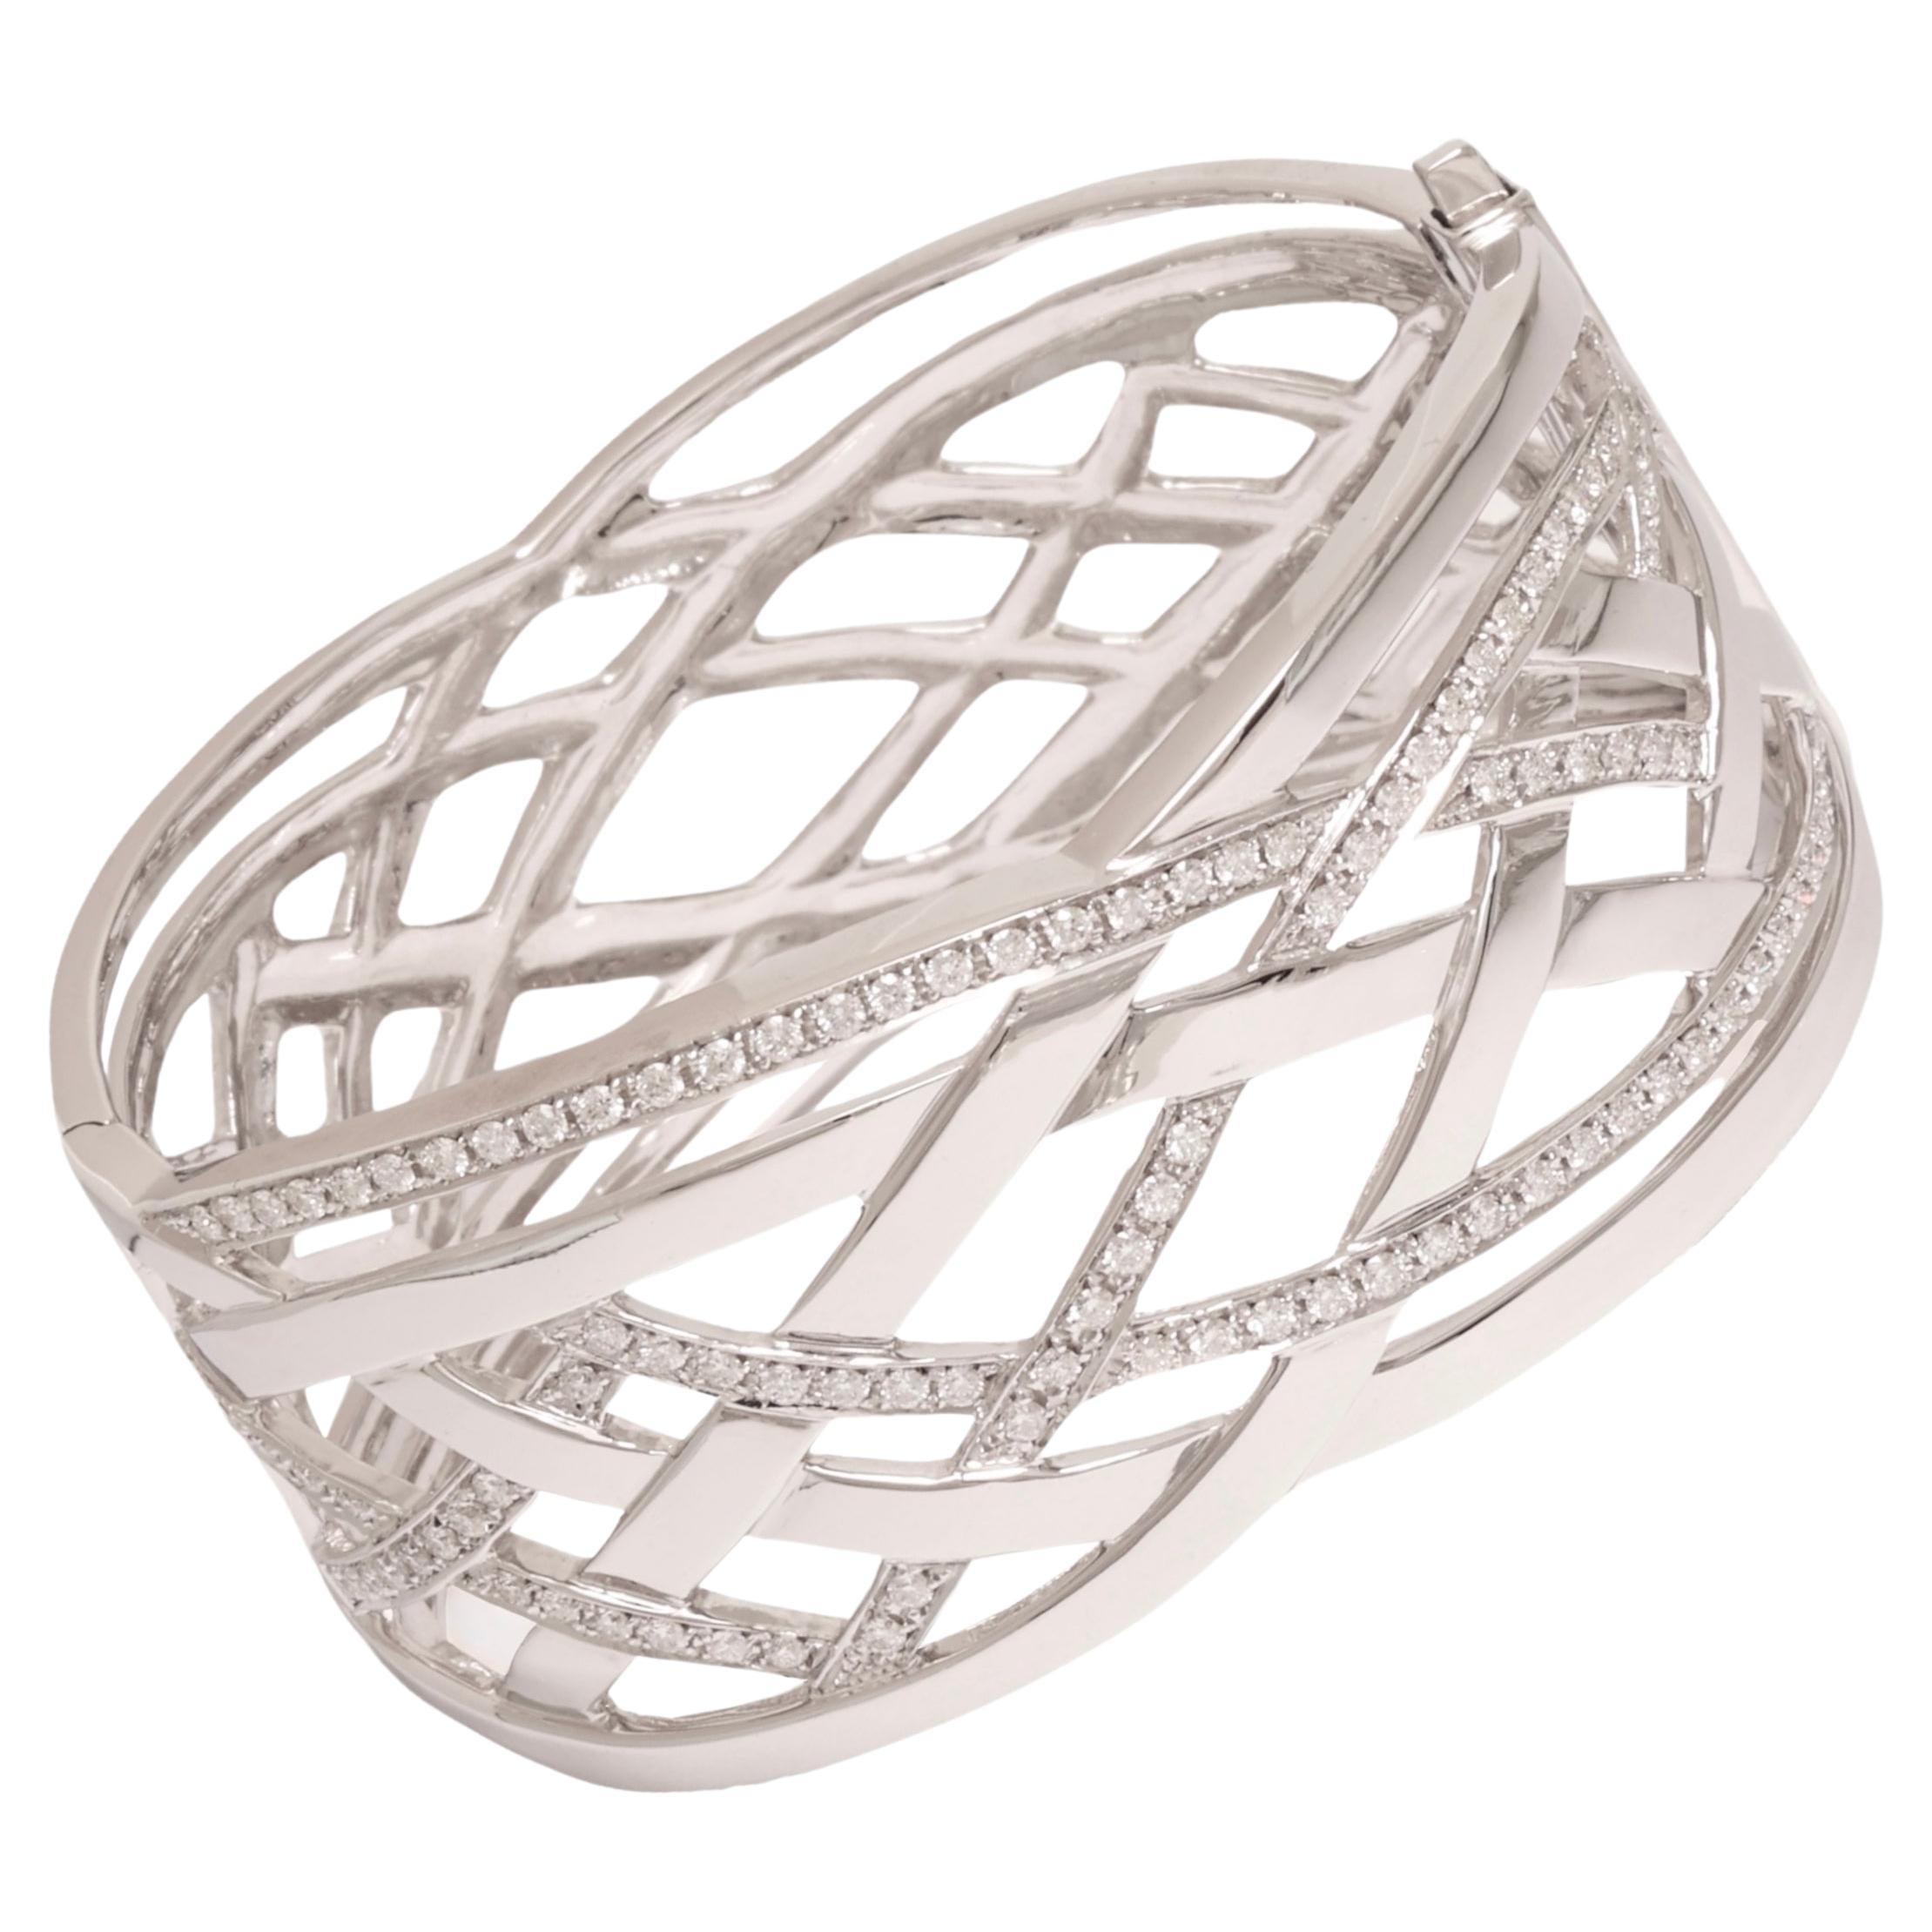 18 kt. Solid White Gold Cuff Bracelet Set with 1.83 ct. Diamonds